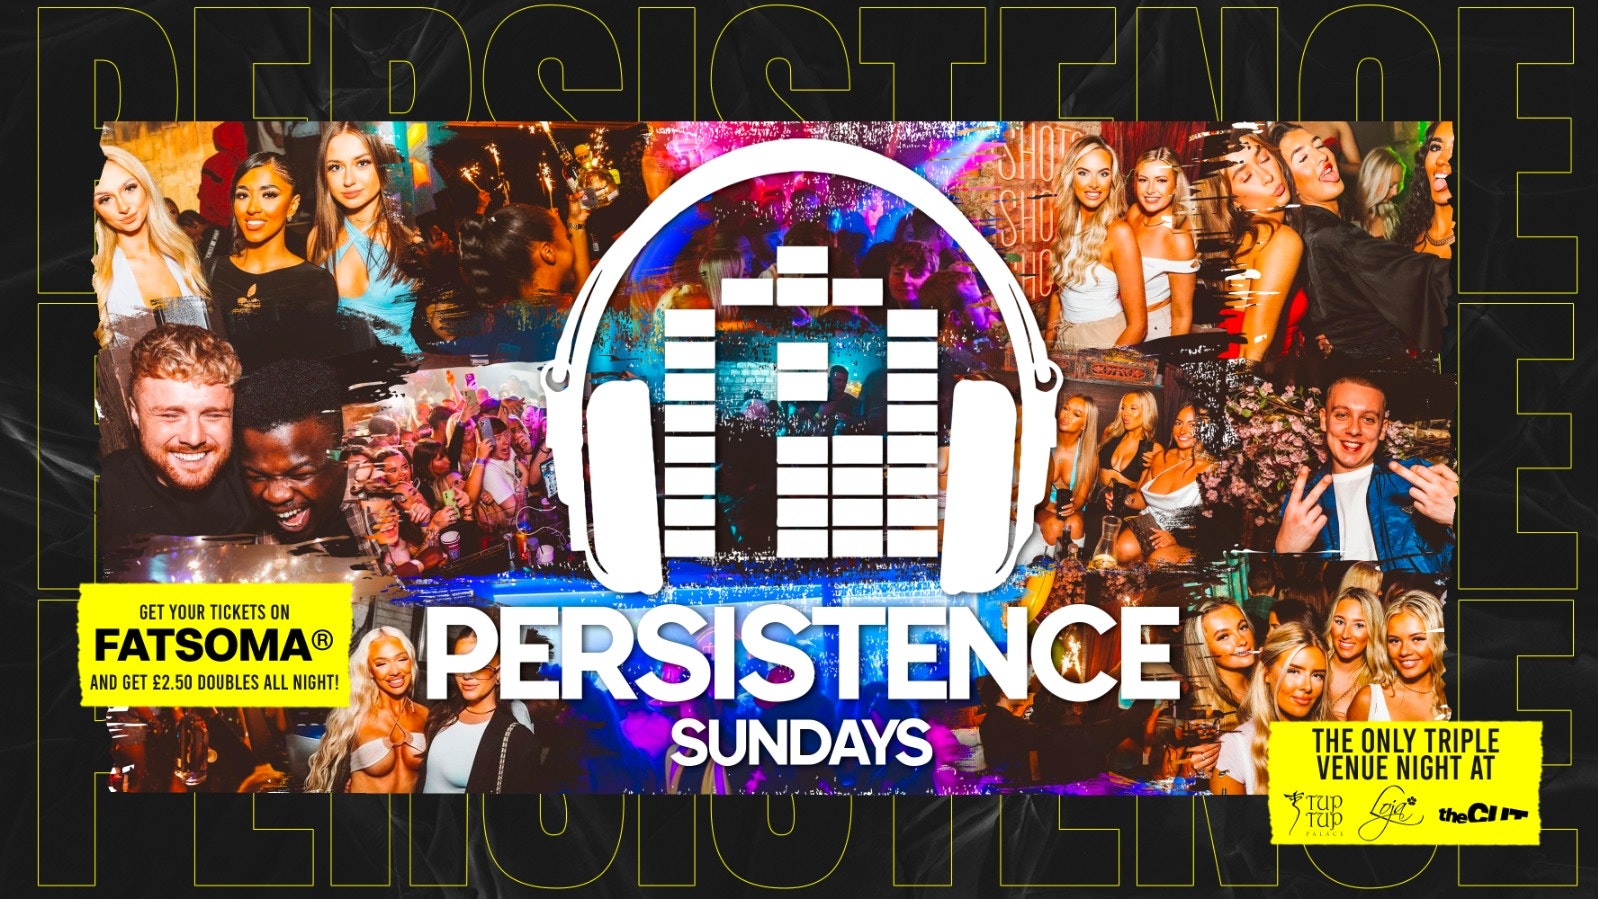 PERSISTENCE | £2.50 DOUBLES WITH A TICKET! | TUP TUP PALACE, LOJA & THE CUT | 16th APRIL